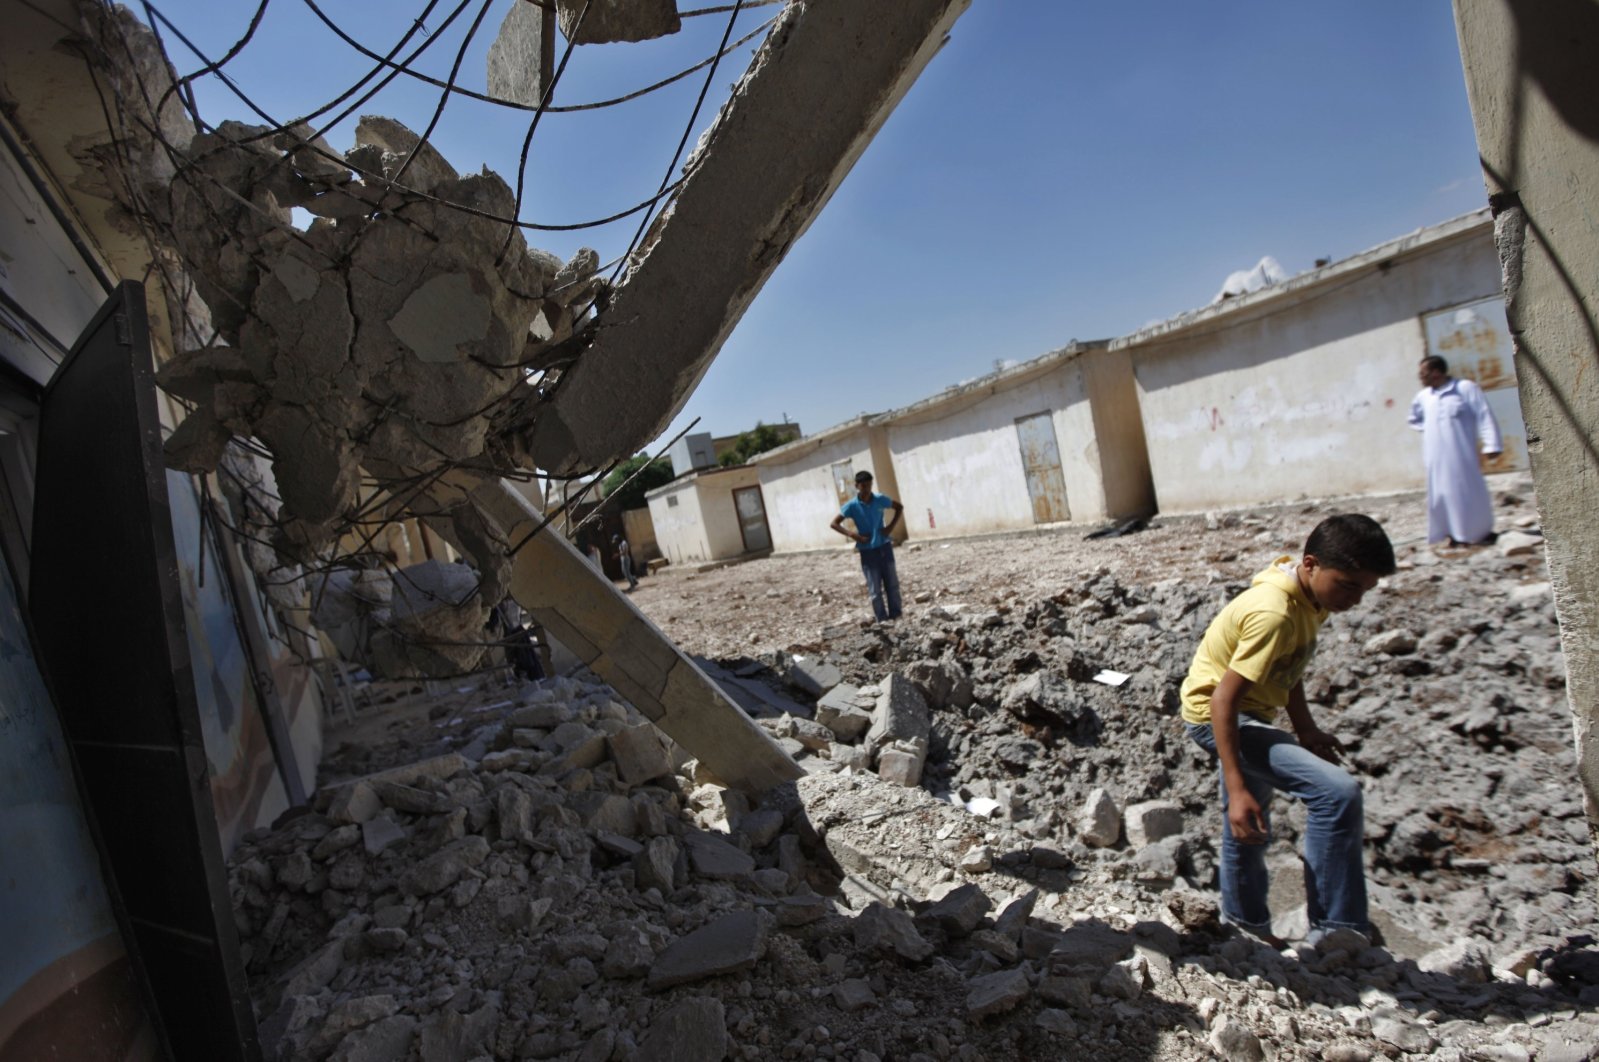 Syrians check the damage at a destroyed school after it was hit by an airstrike killing six Syrians in the town of Tal Rifaat on the outskirts of Aleppo, Syria, Aug. 8, 2012. (AP File Photo)